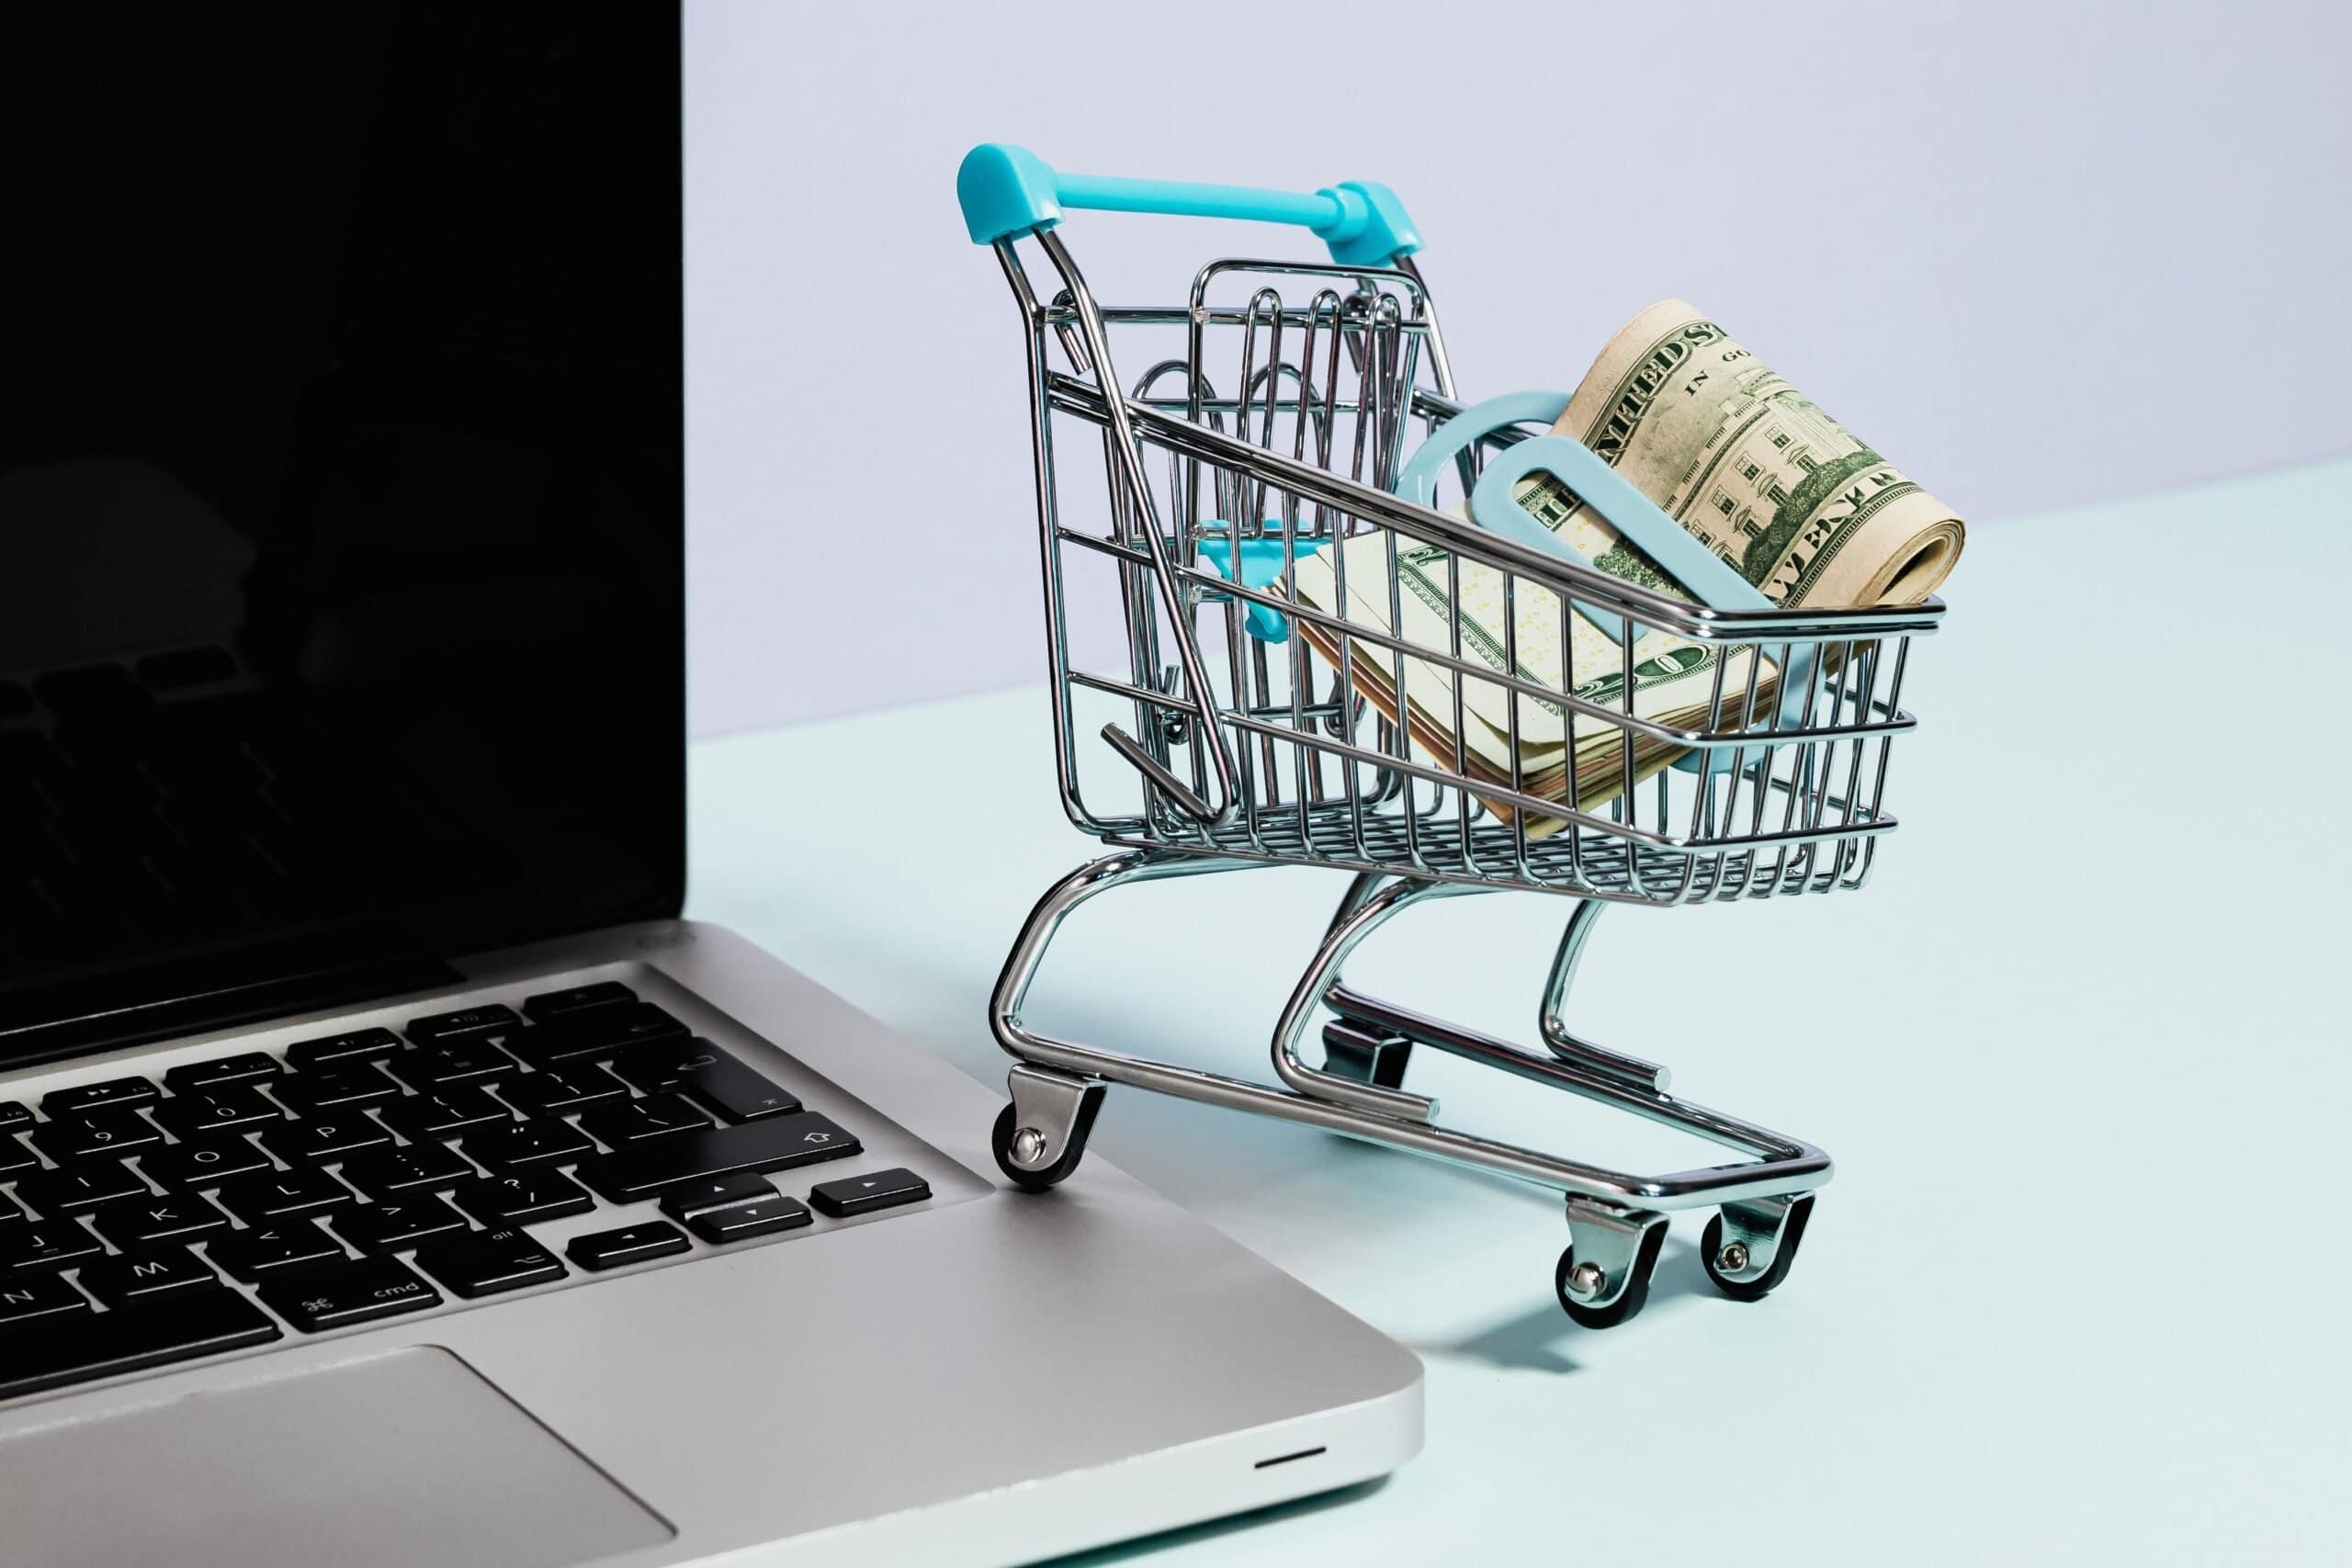 Tiny shopping cart filled with banknotes next to a laptop